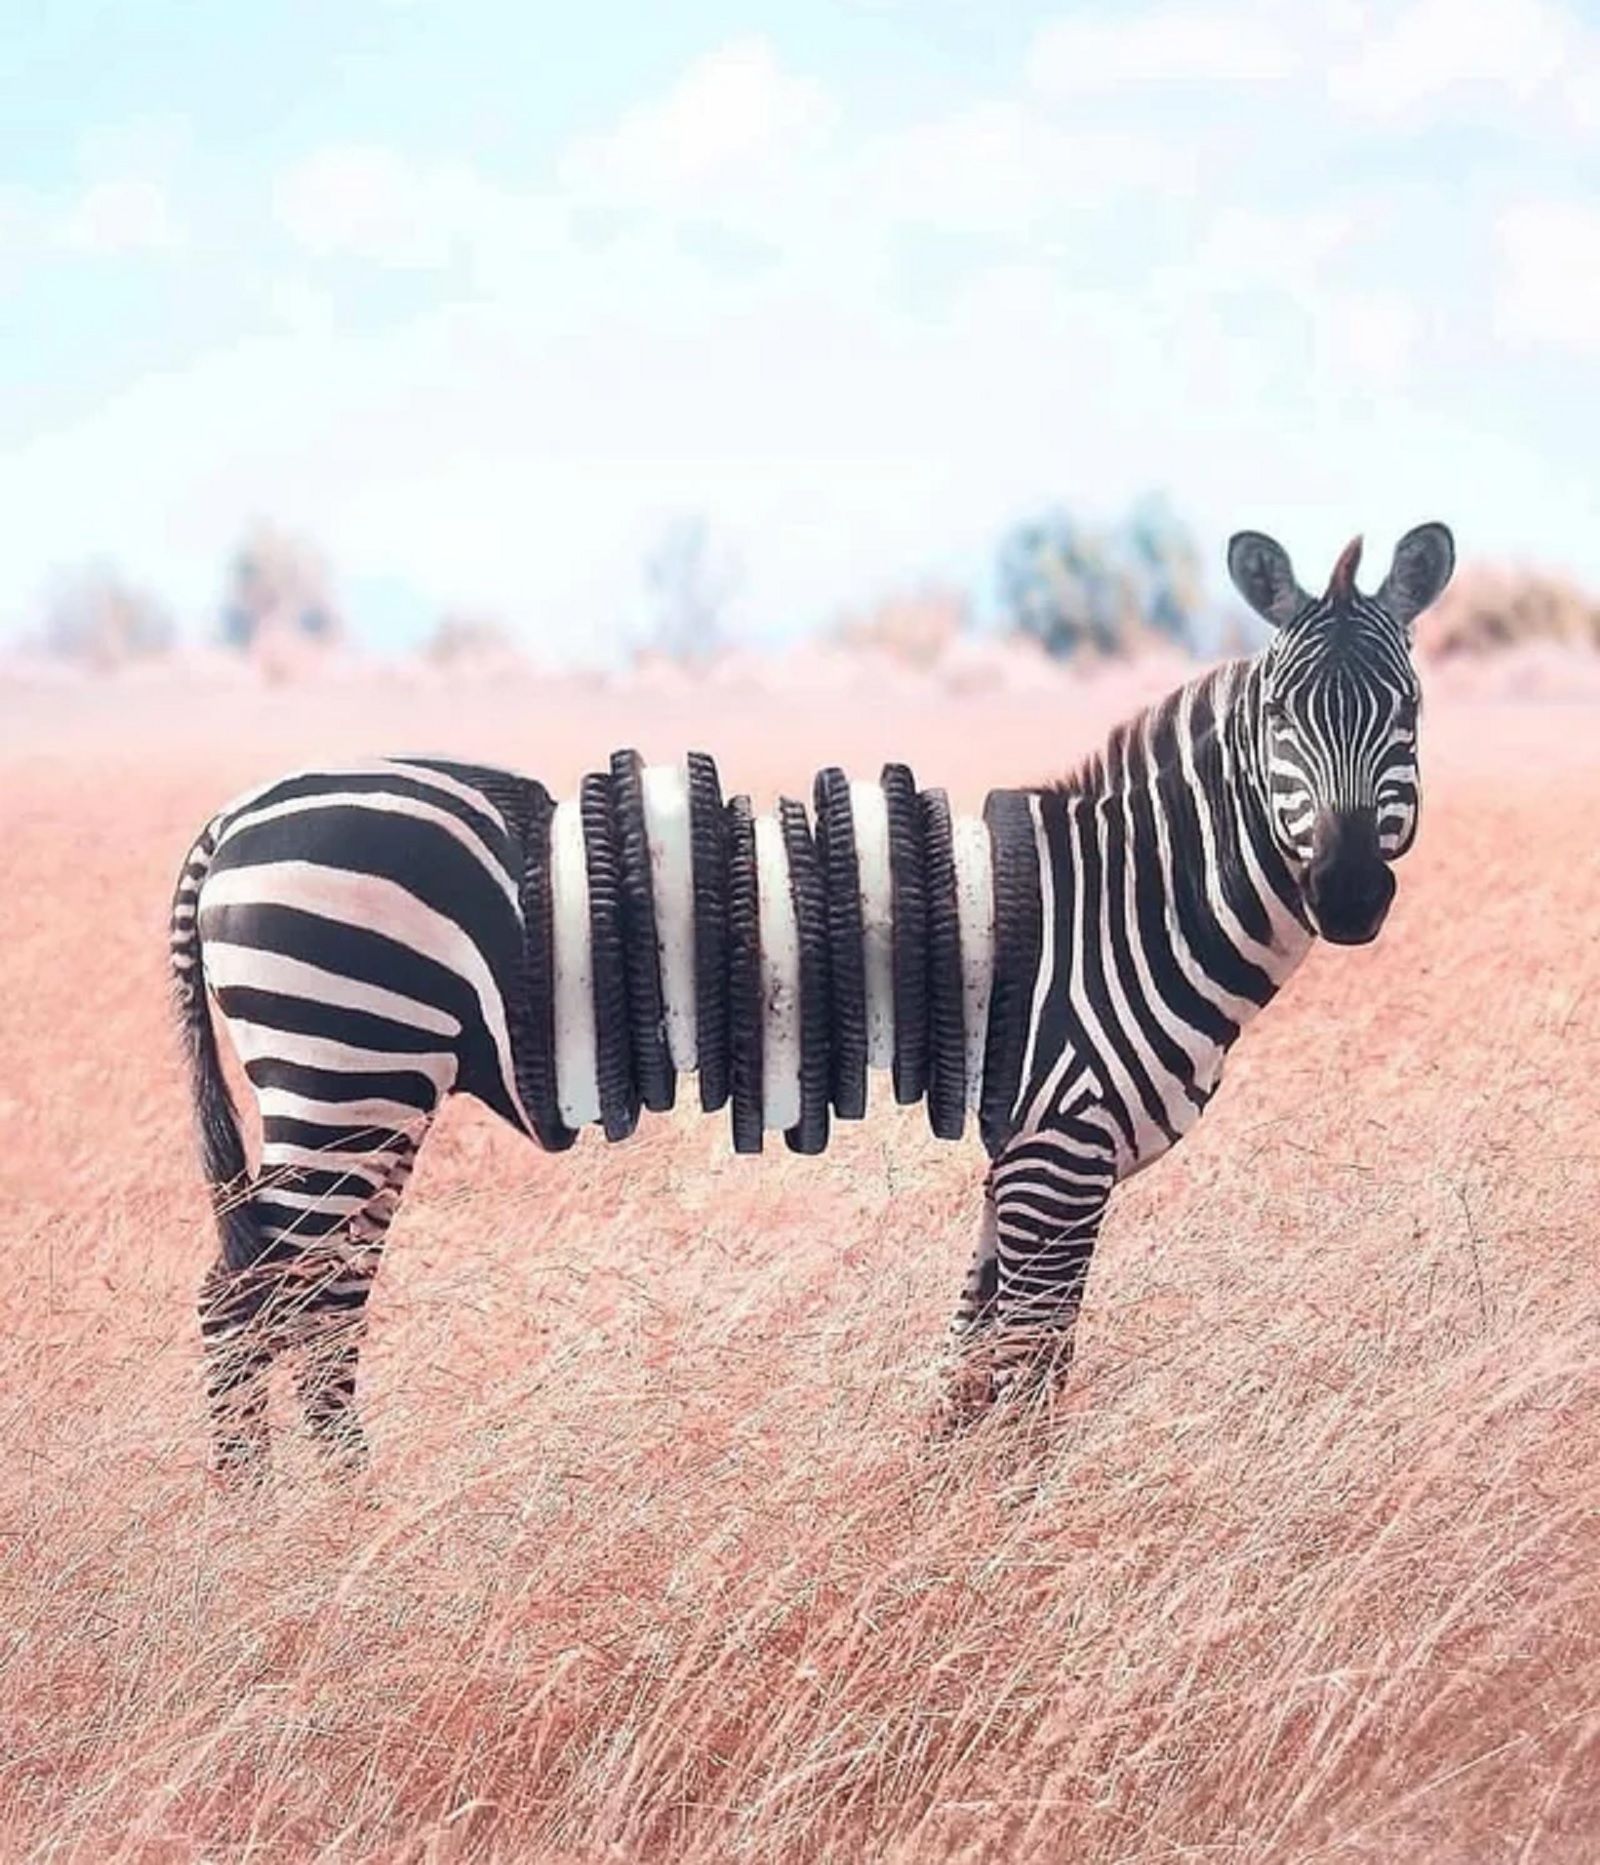 Bonkers New Animals Imagined With The Power Of Photoshop image 1